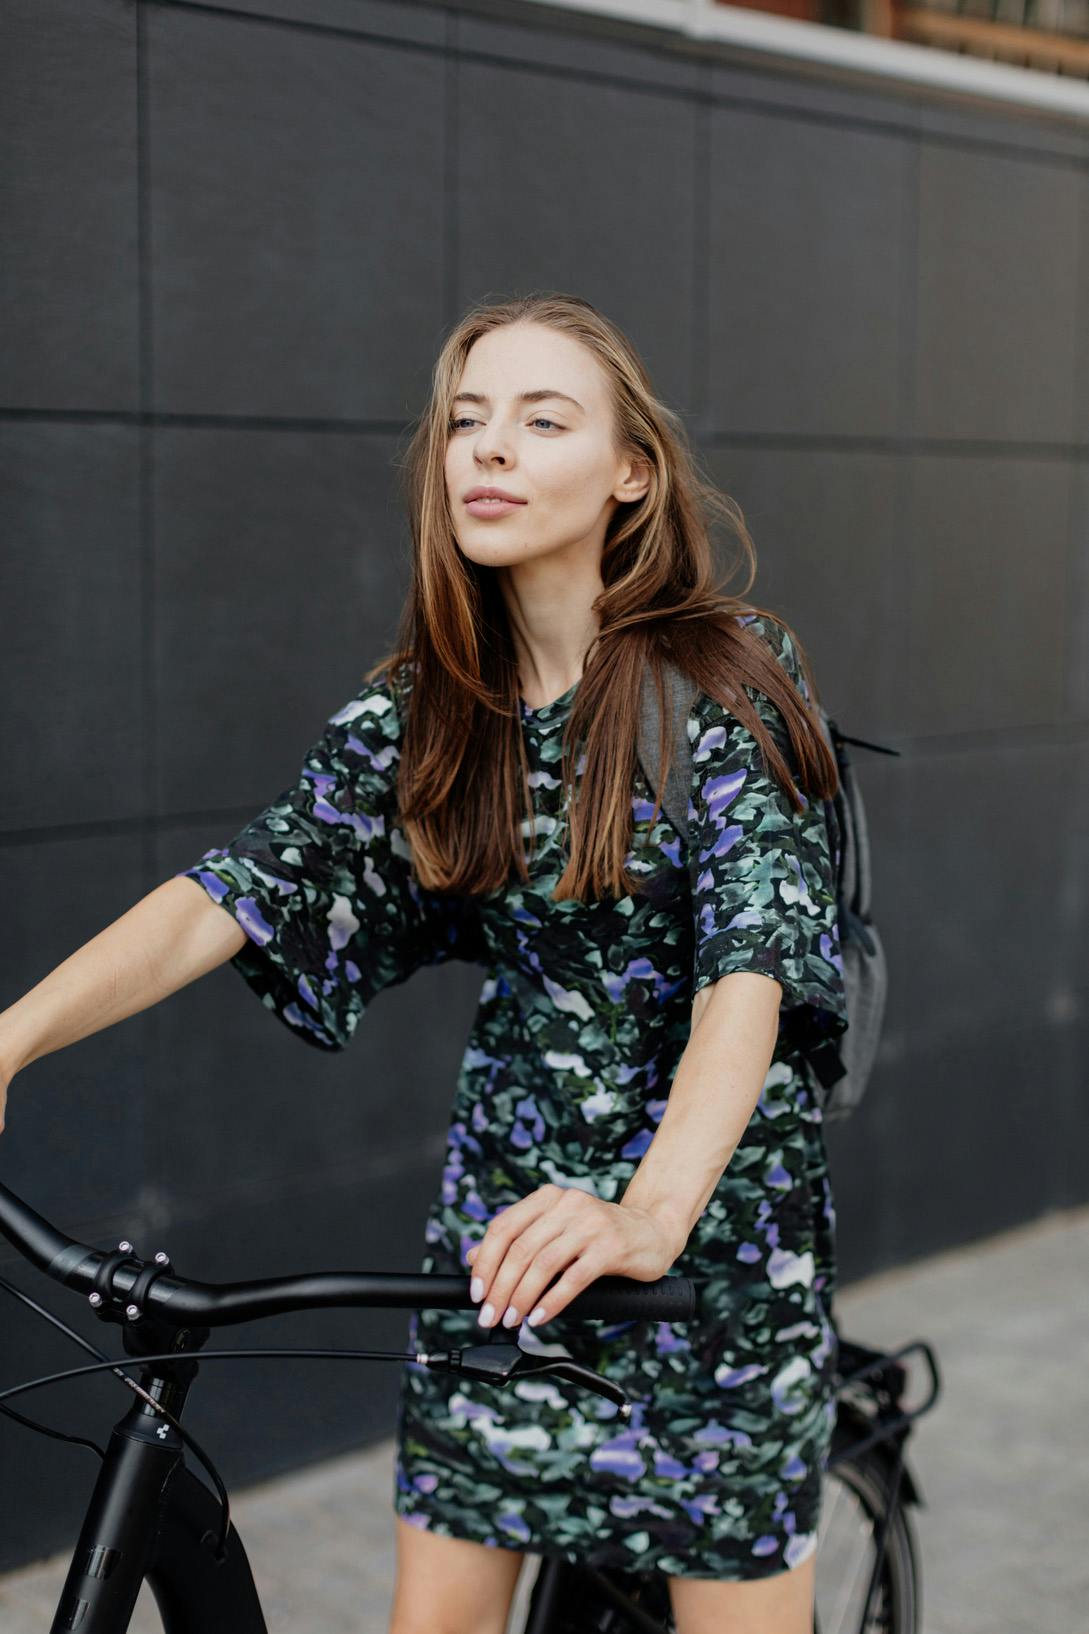 Woman in floral dress about to ride a black bicycle